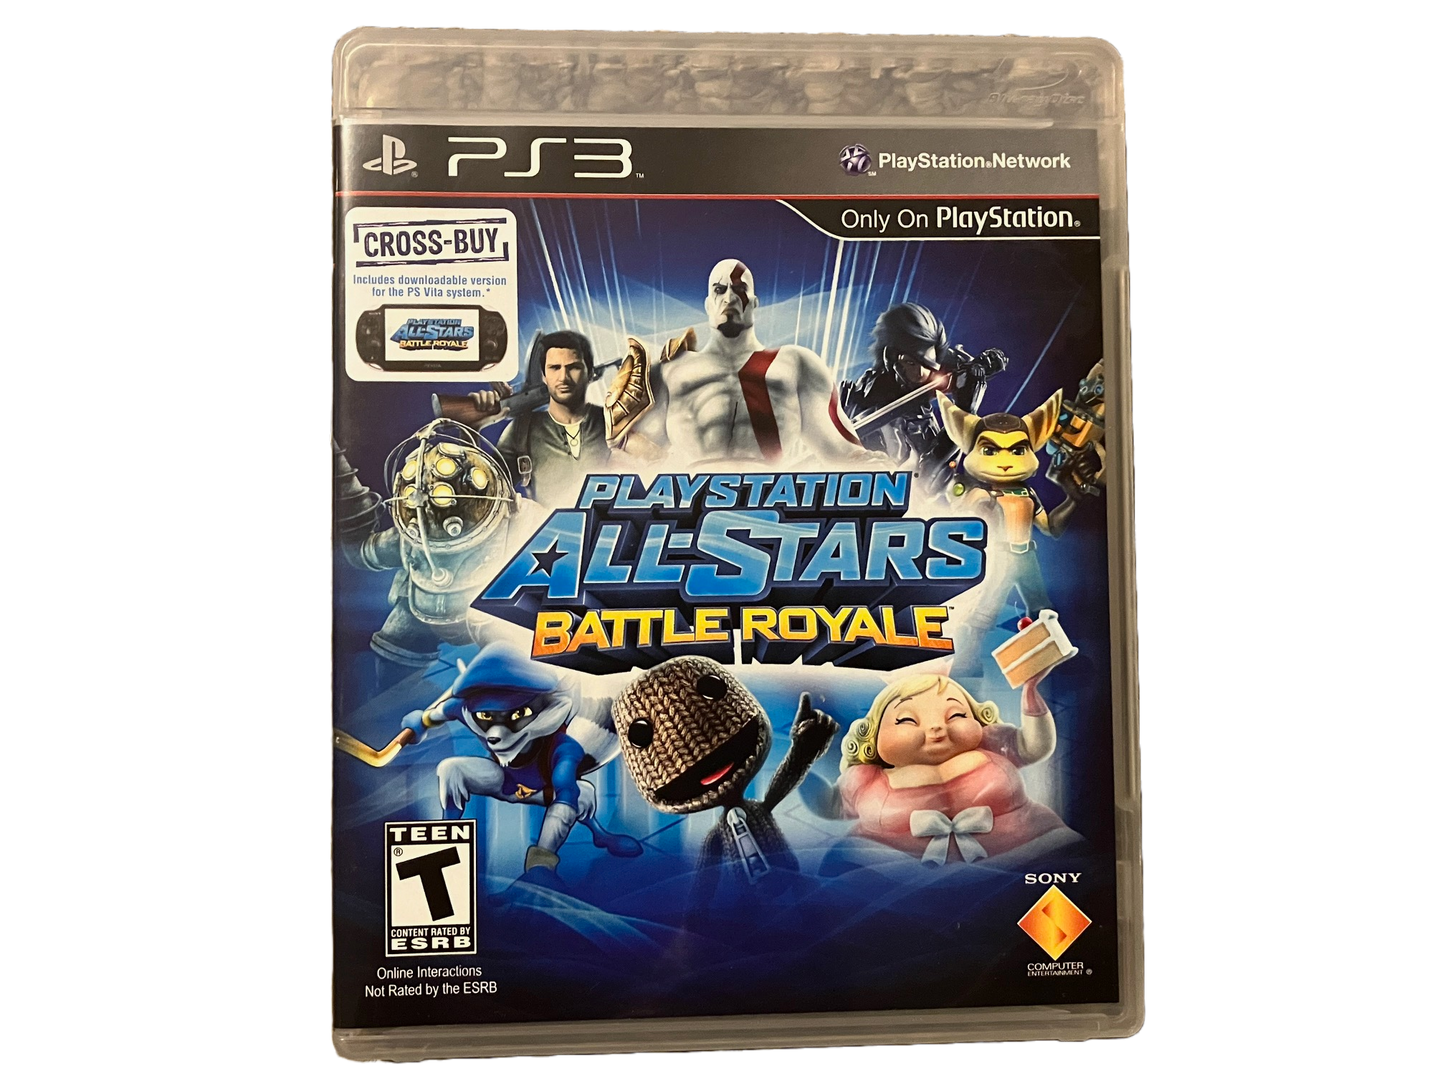 Playstation All-Stars Battle Royale Sony PlayStation 3 PS3 Complete